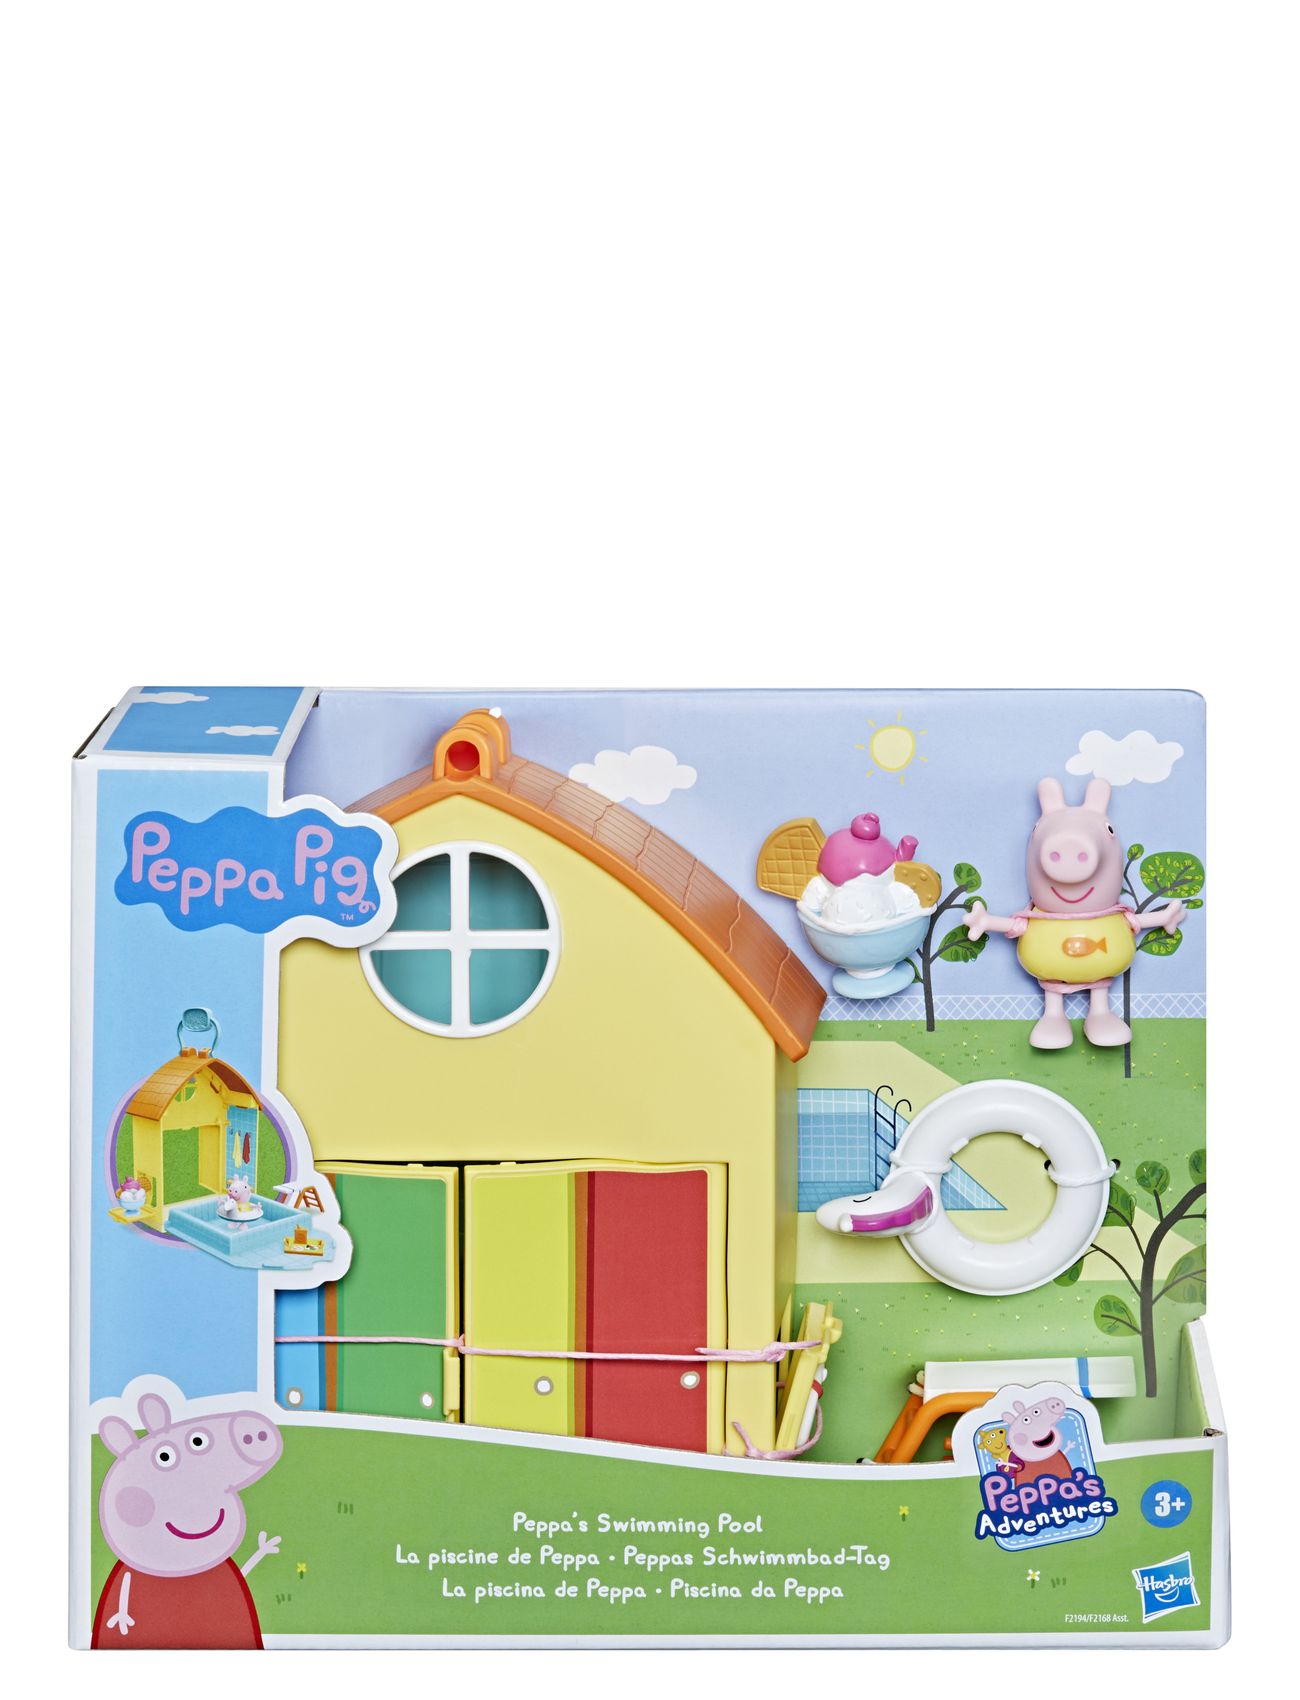 "Peppa Pig" "Peppa’s Swimming Pool Fun Toys Playsets & Action Figures Movies Fairy Tale Characters Multi/patterned Peppa